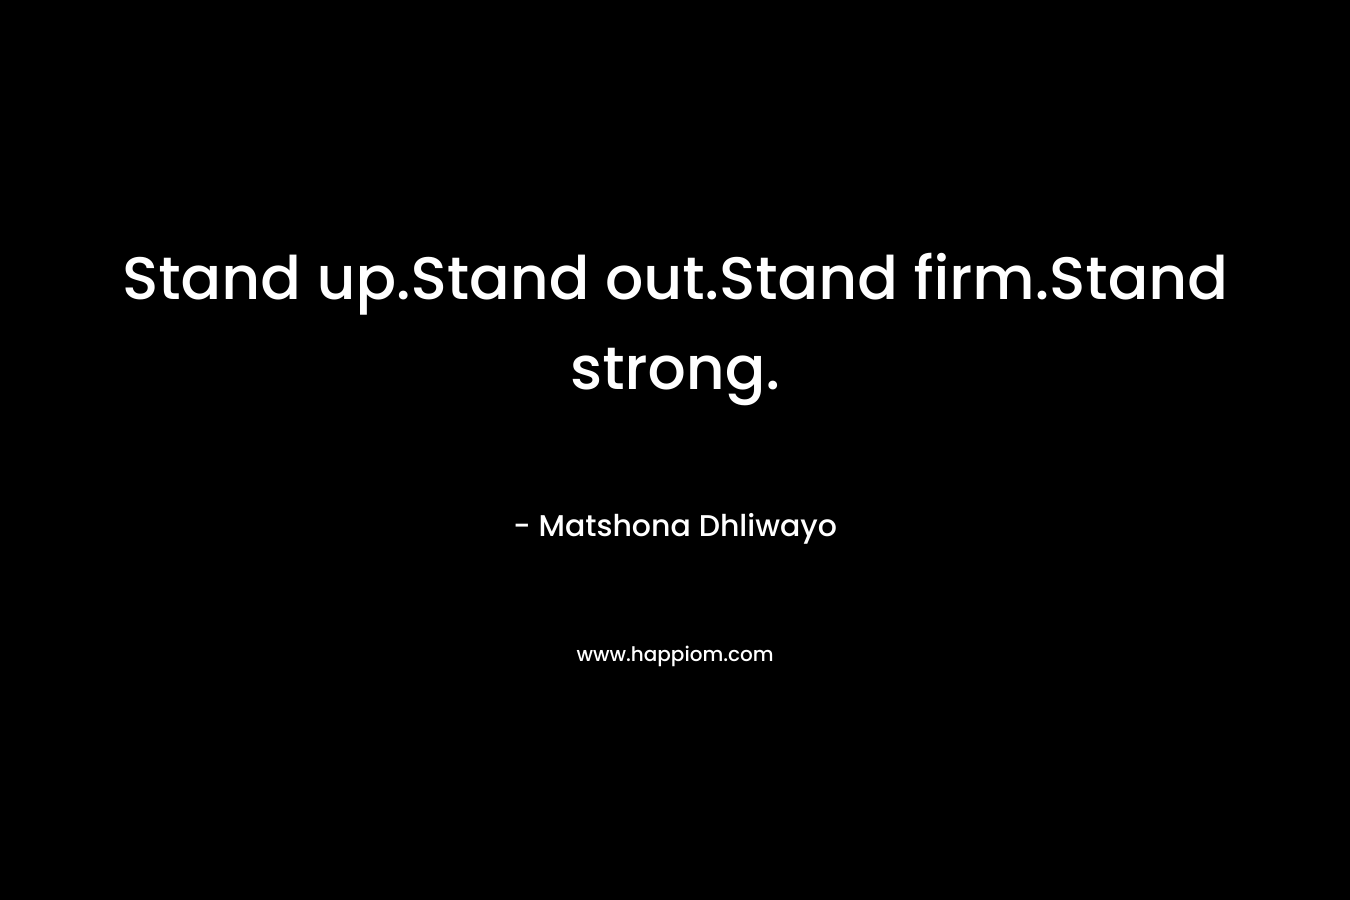 Stand up.Stand out.Stand firm.Stand strong.